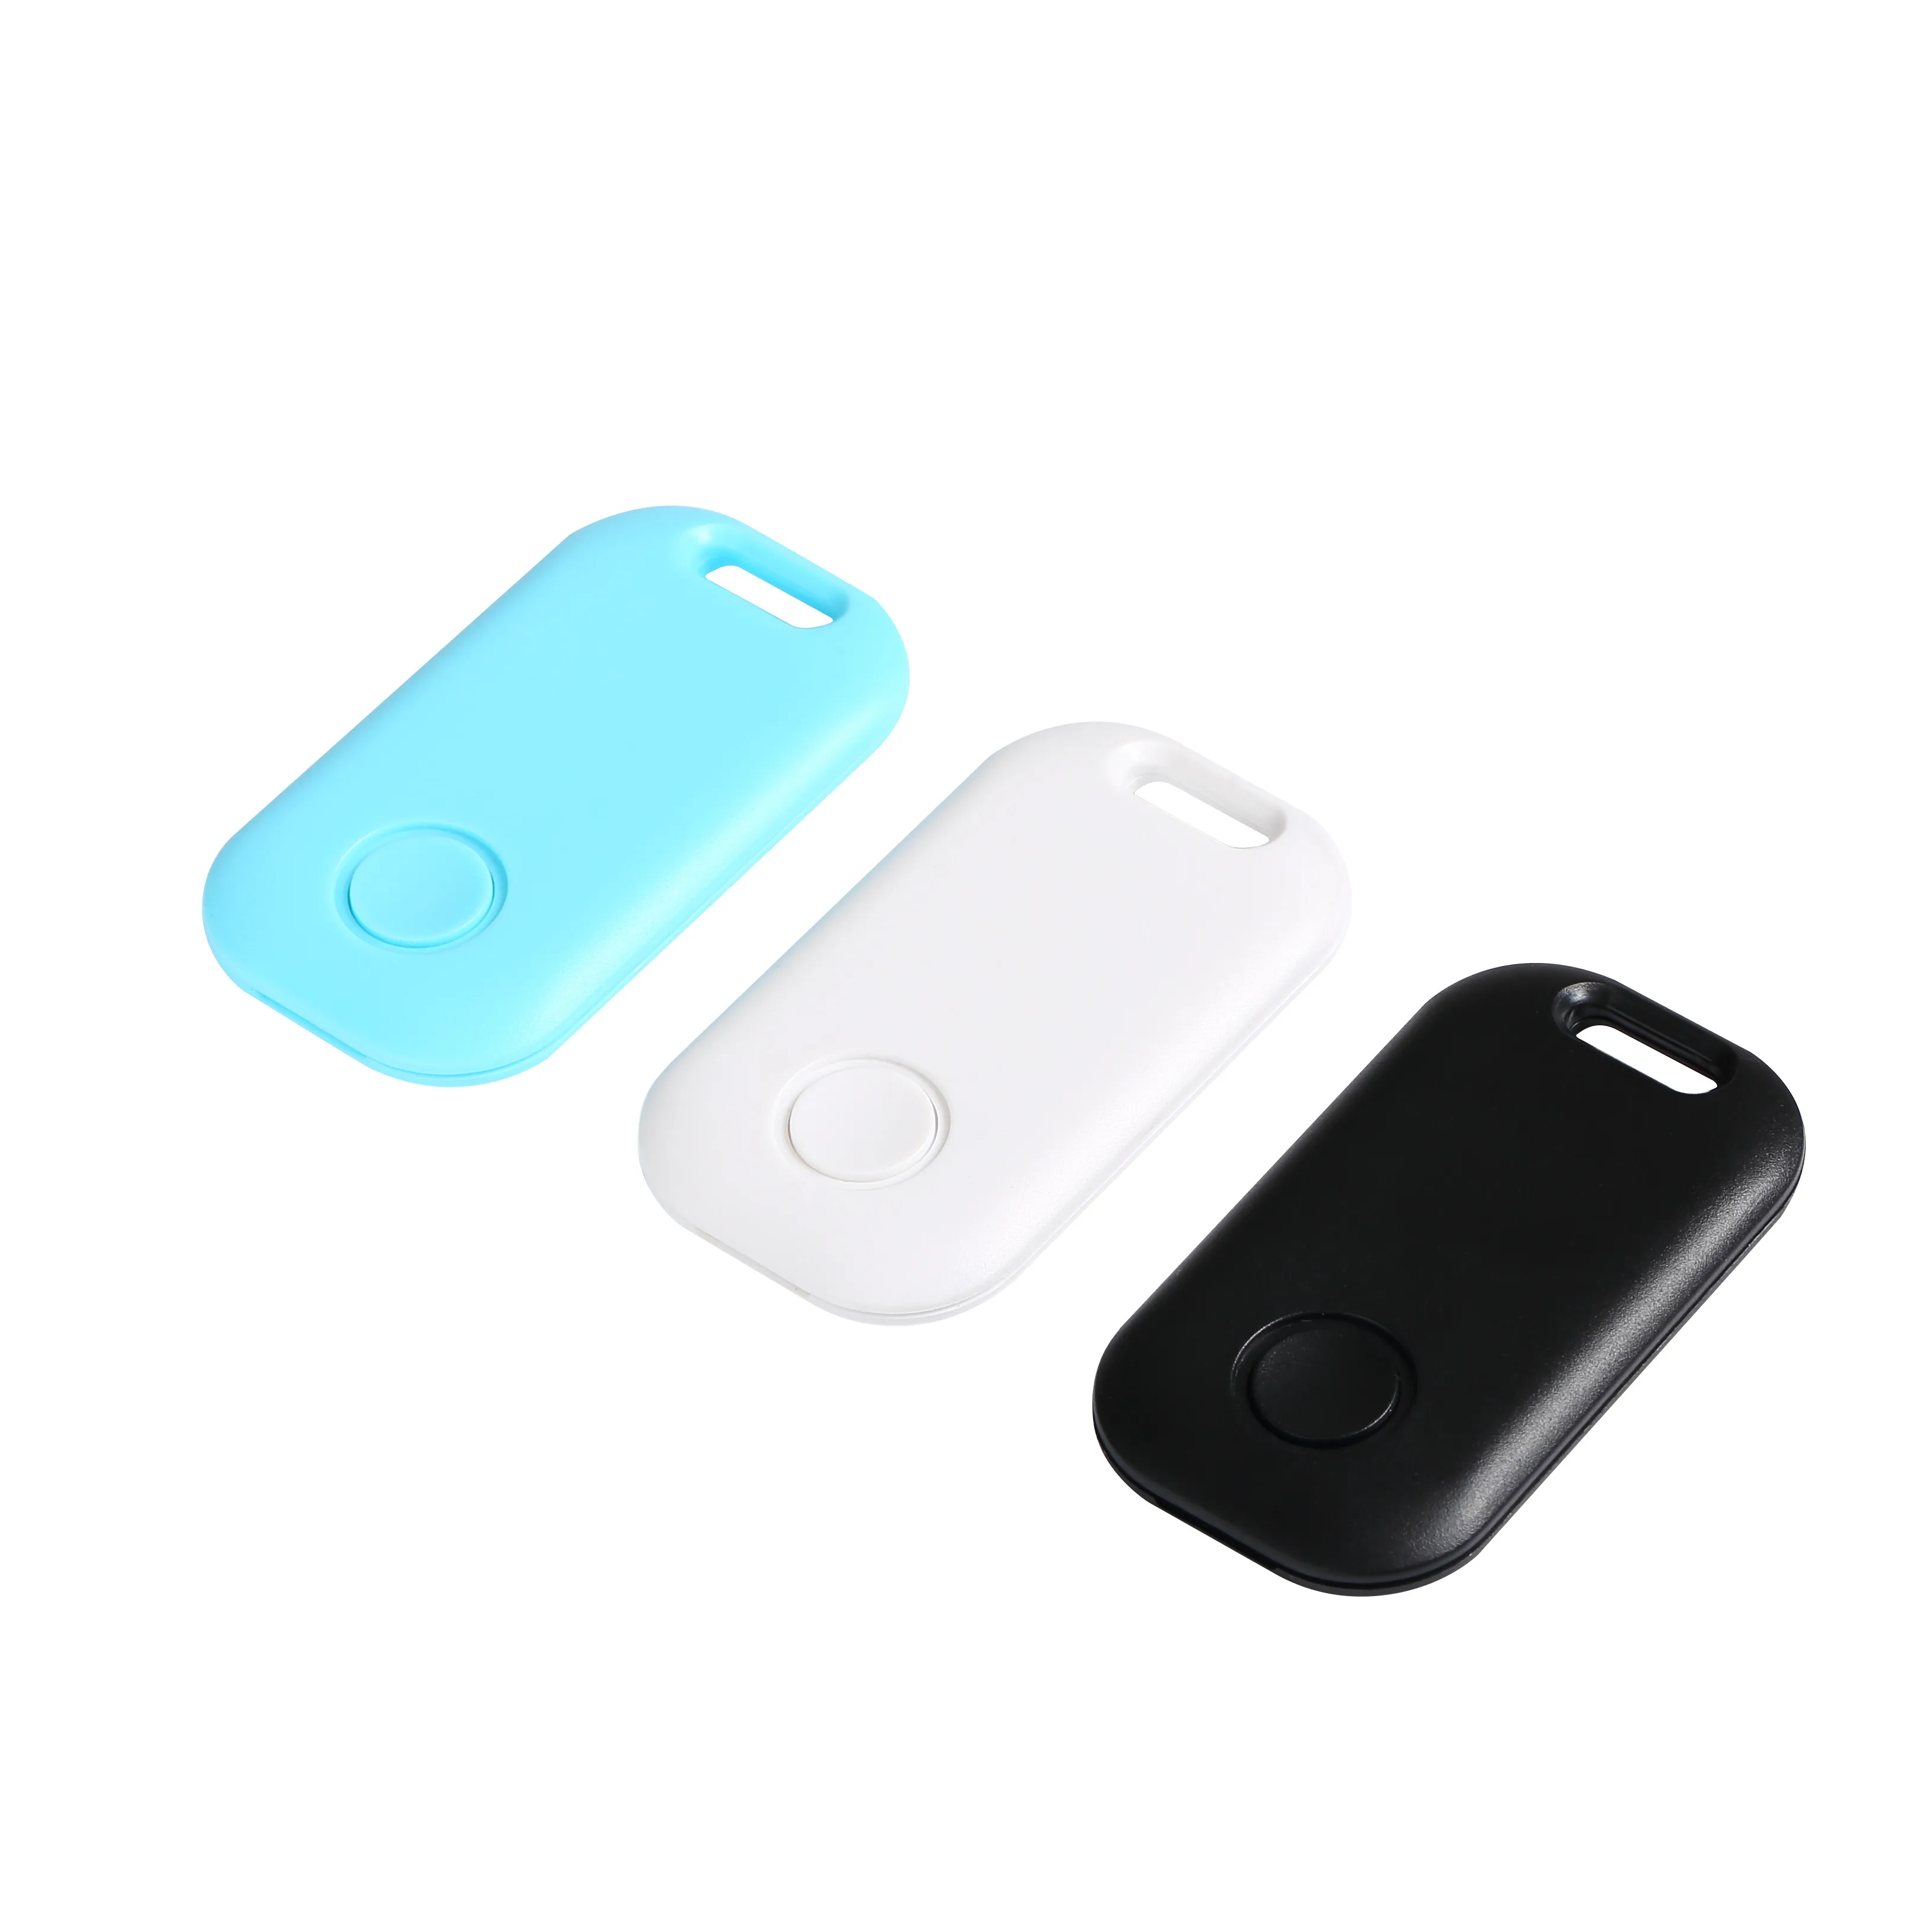 

Blue Tooth 4G 3G WiFi Electric Smart Pet Mini Tracker Activity Gps Trackers For Pets Dogs, Customized color